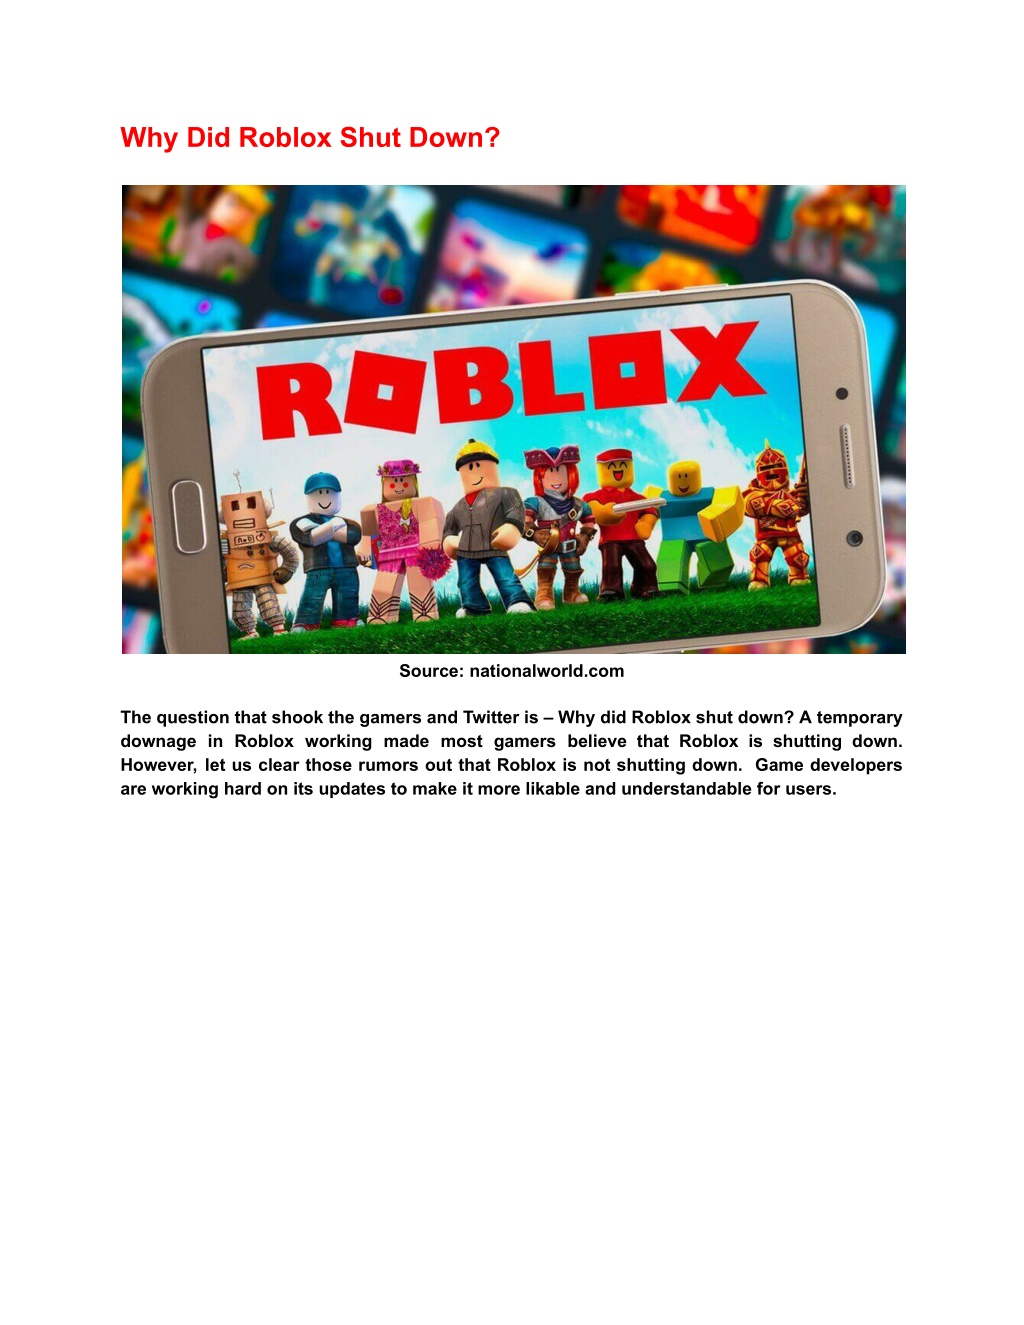 PPT Why Is Roblox Shutting Down? Wasn’t It a Temporary Outage